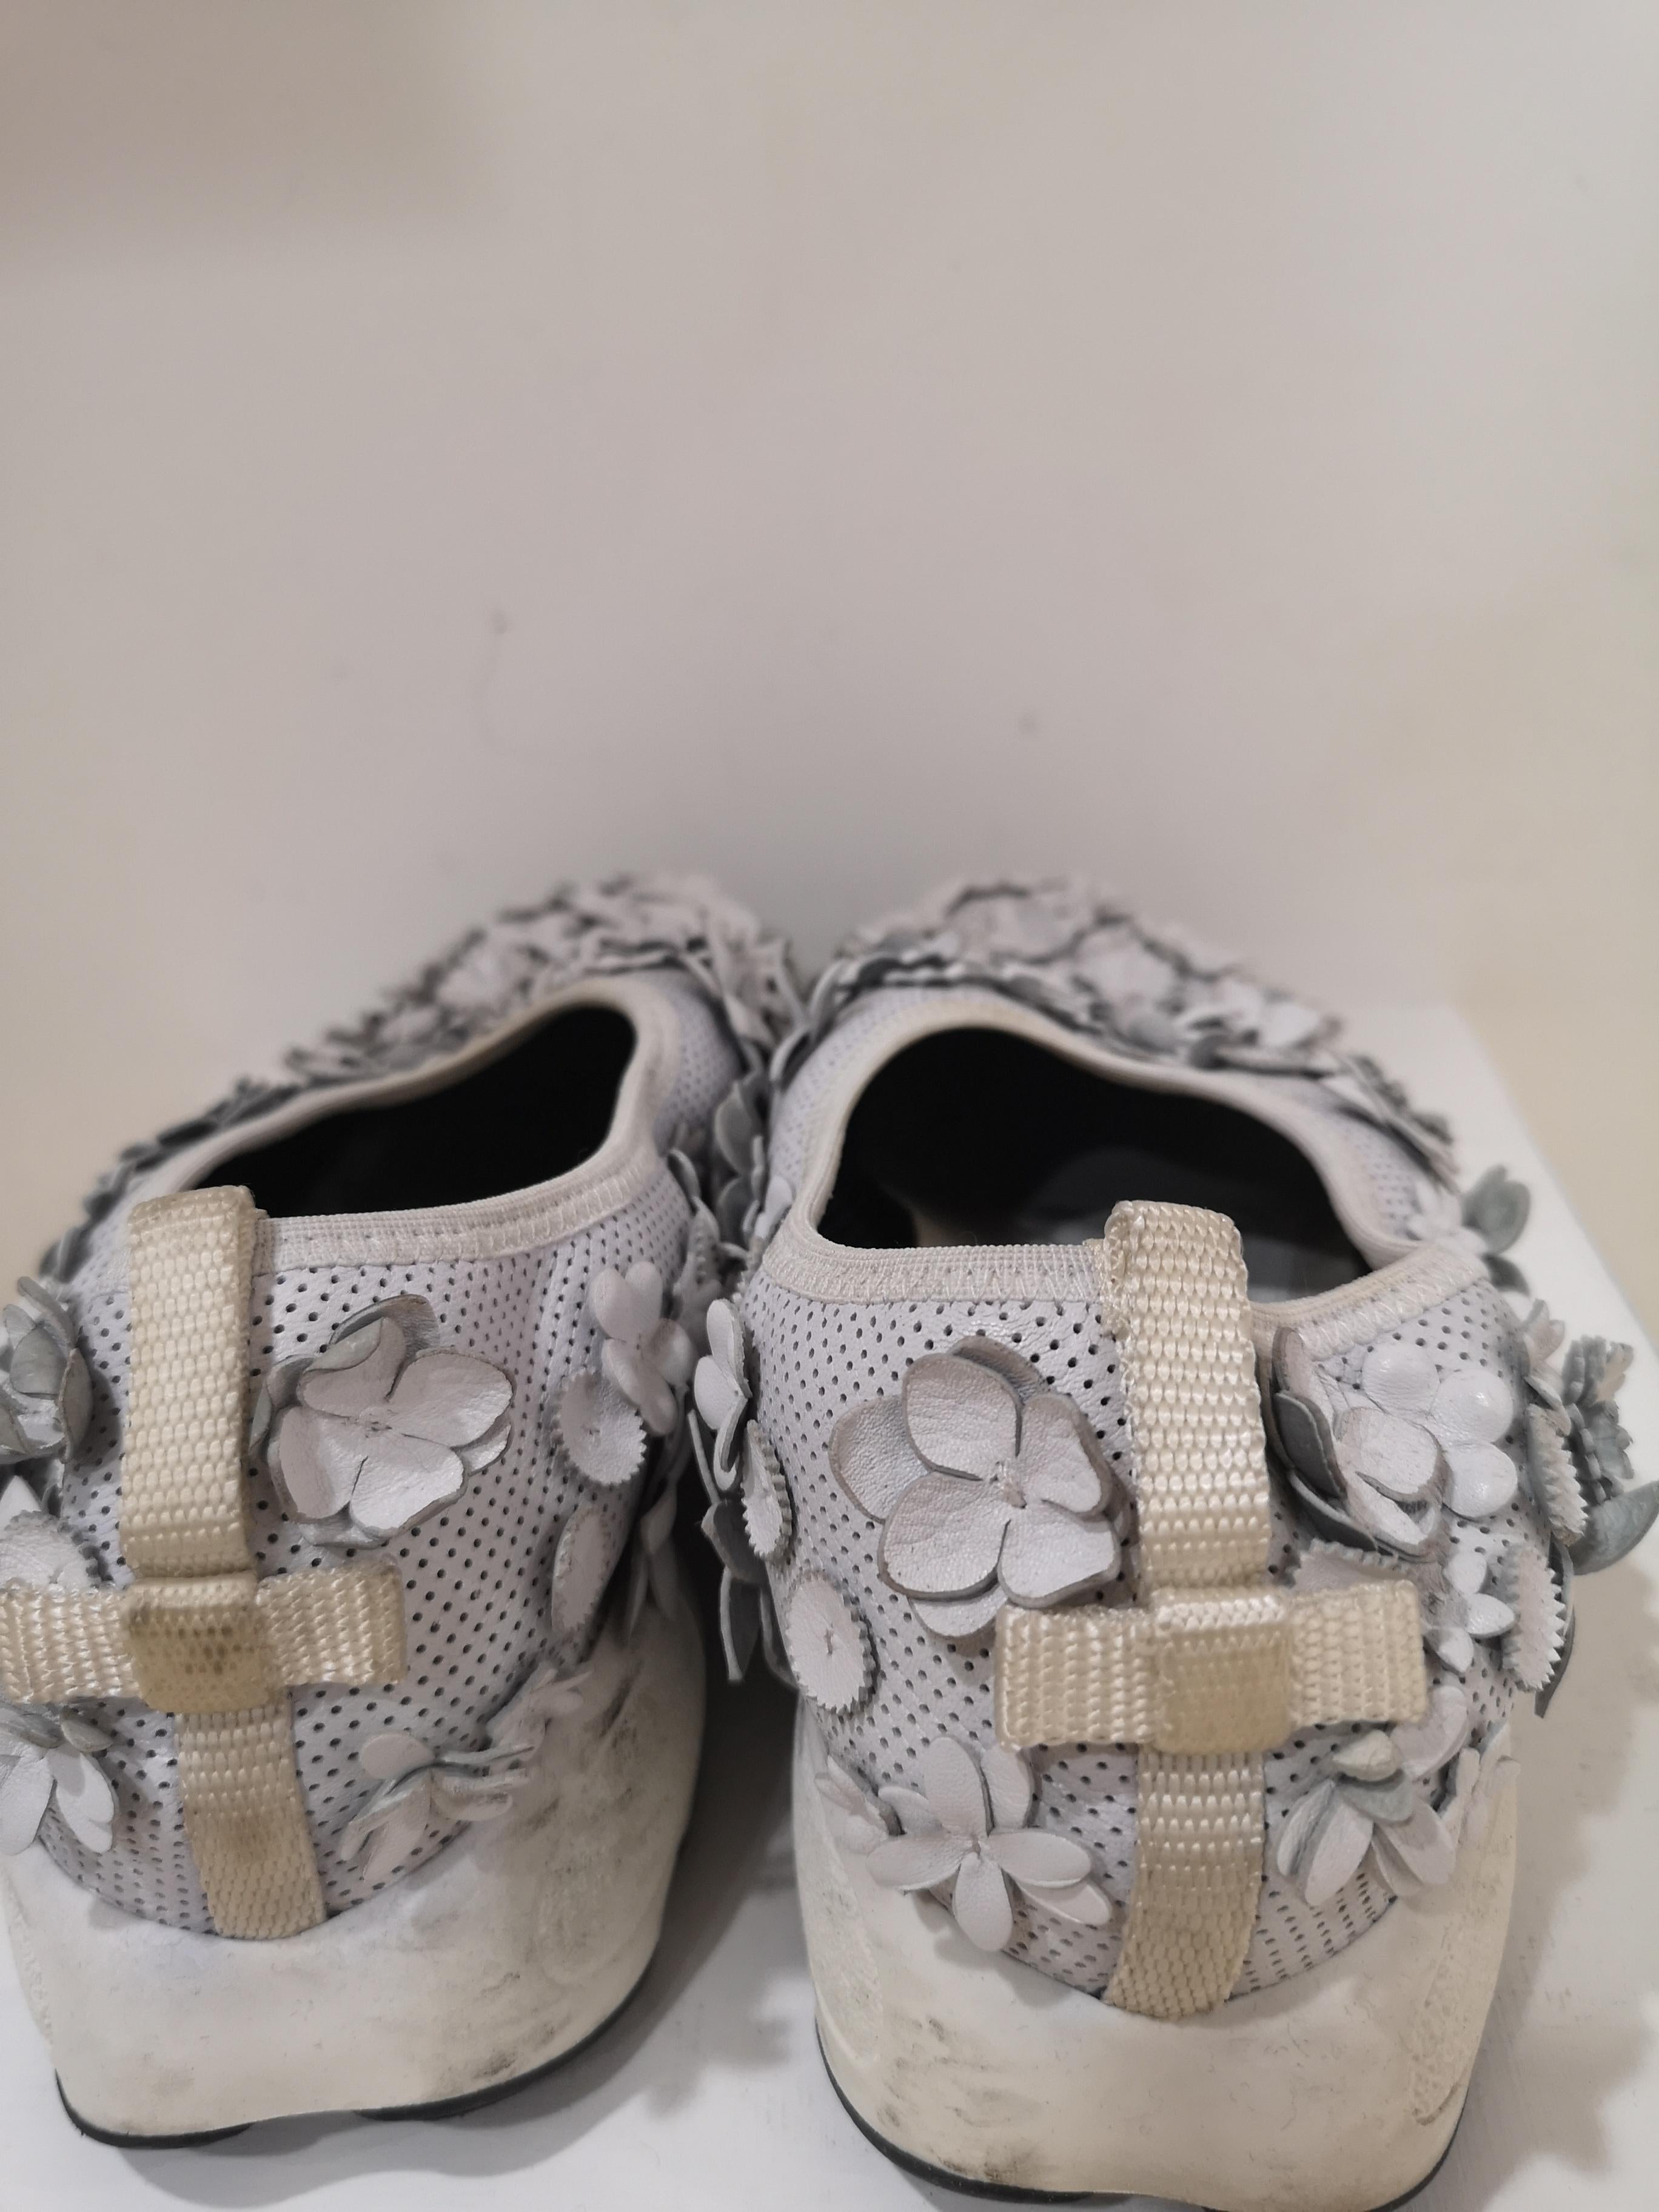 Christian Dior White flowers Shoes unworn 4